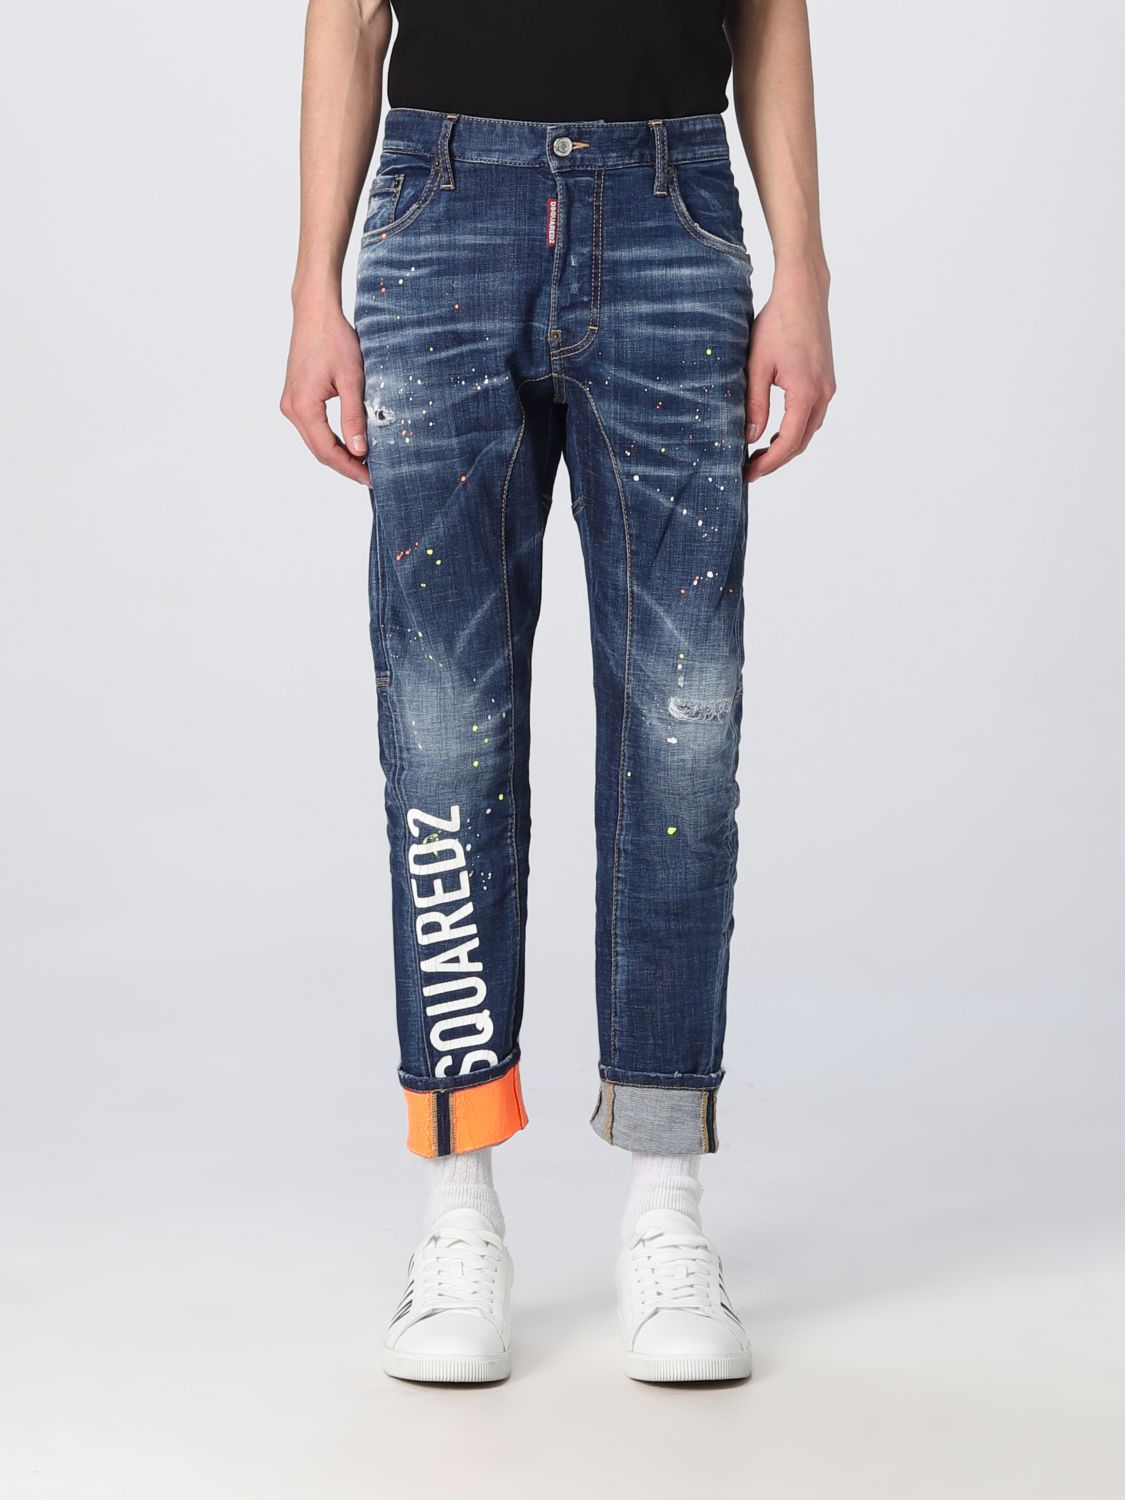 Jeans Dsquared2: Jeans Dsquared2 in denim blue navy 1